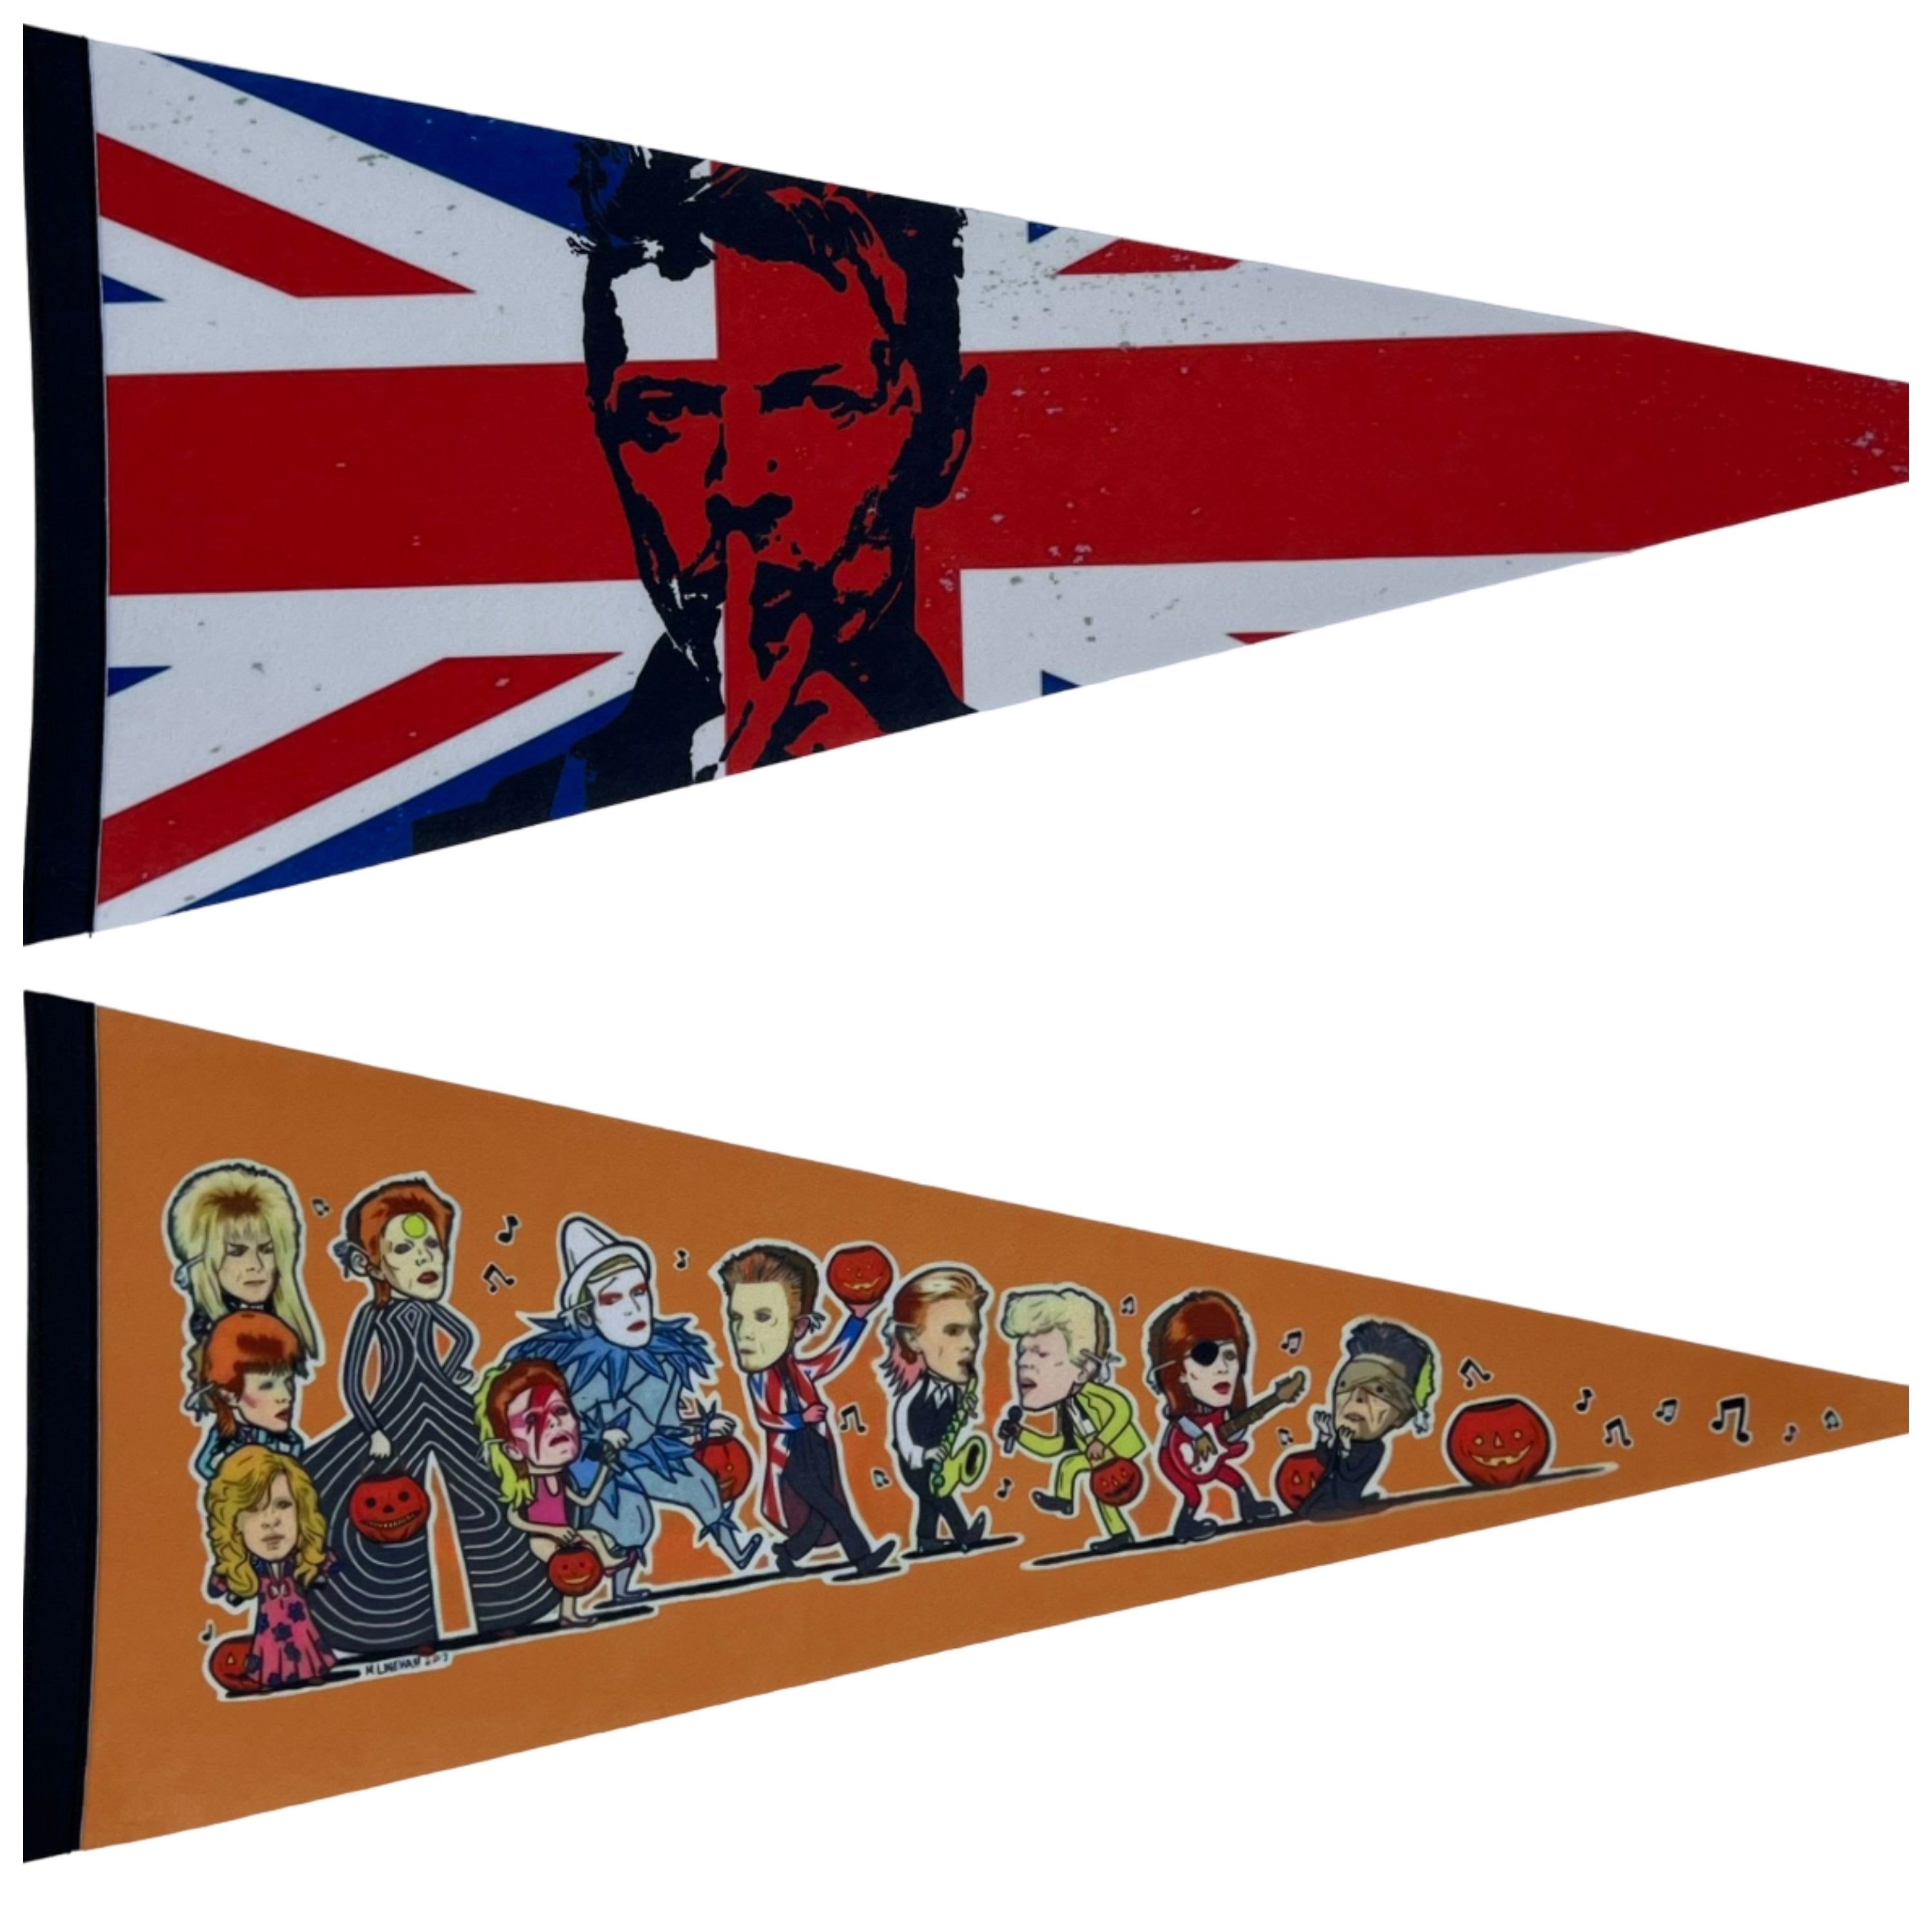 David Bowie Music collectibles vintage pennants David Bowie vaantje vlaggetje vlag pennant flag rock uk bowie wall decor david bowie gift uk - UK flag